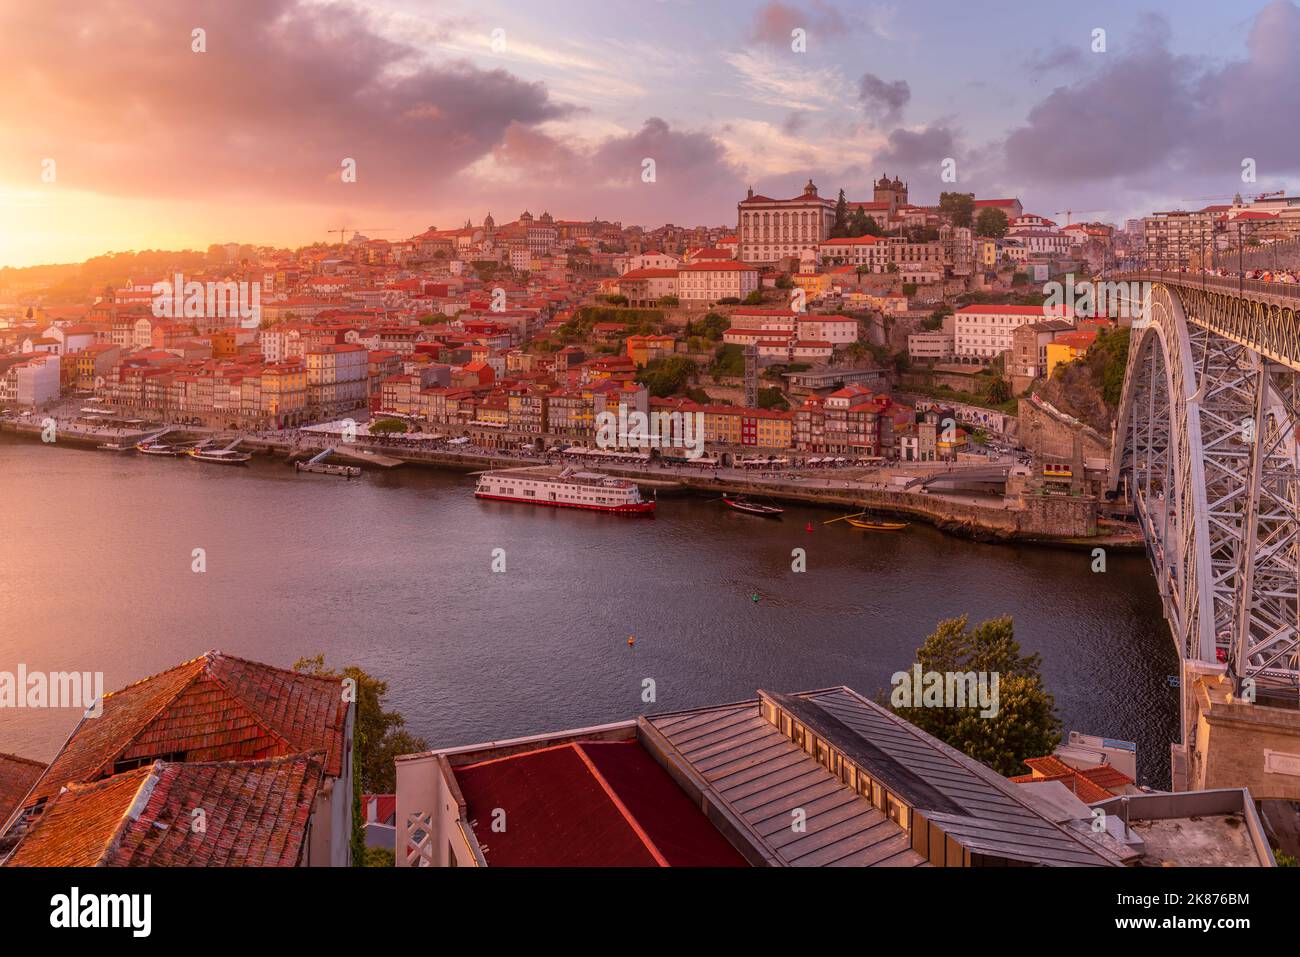 View of the Dom Luis I bridge over Douro River aligned with colourful buildings at sunset, looking towards the Ribeira district, UNESCO Stock Photo